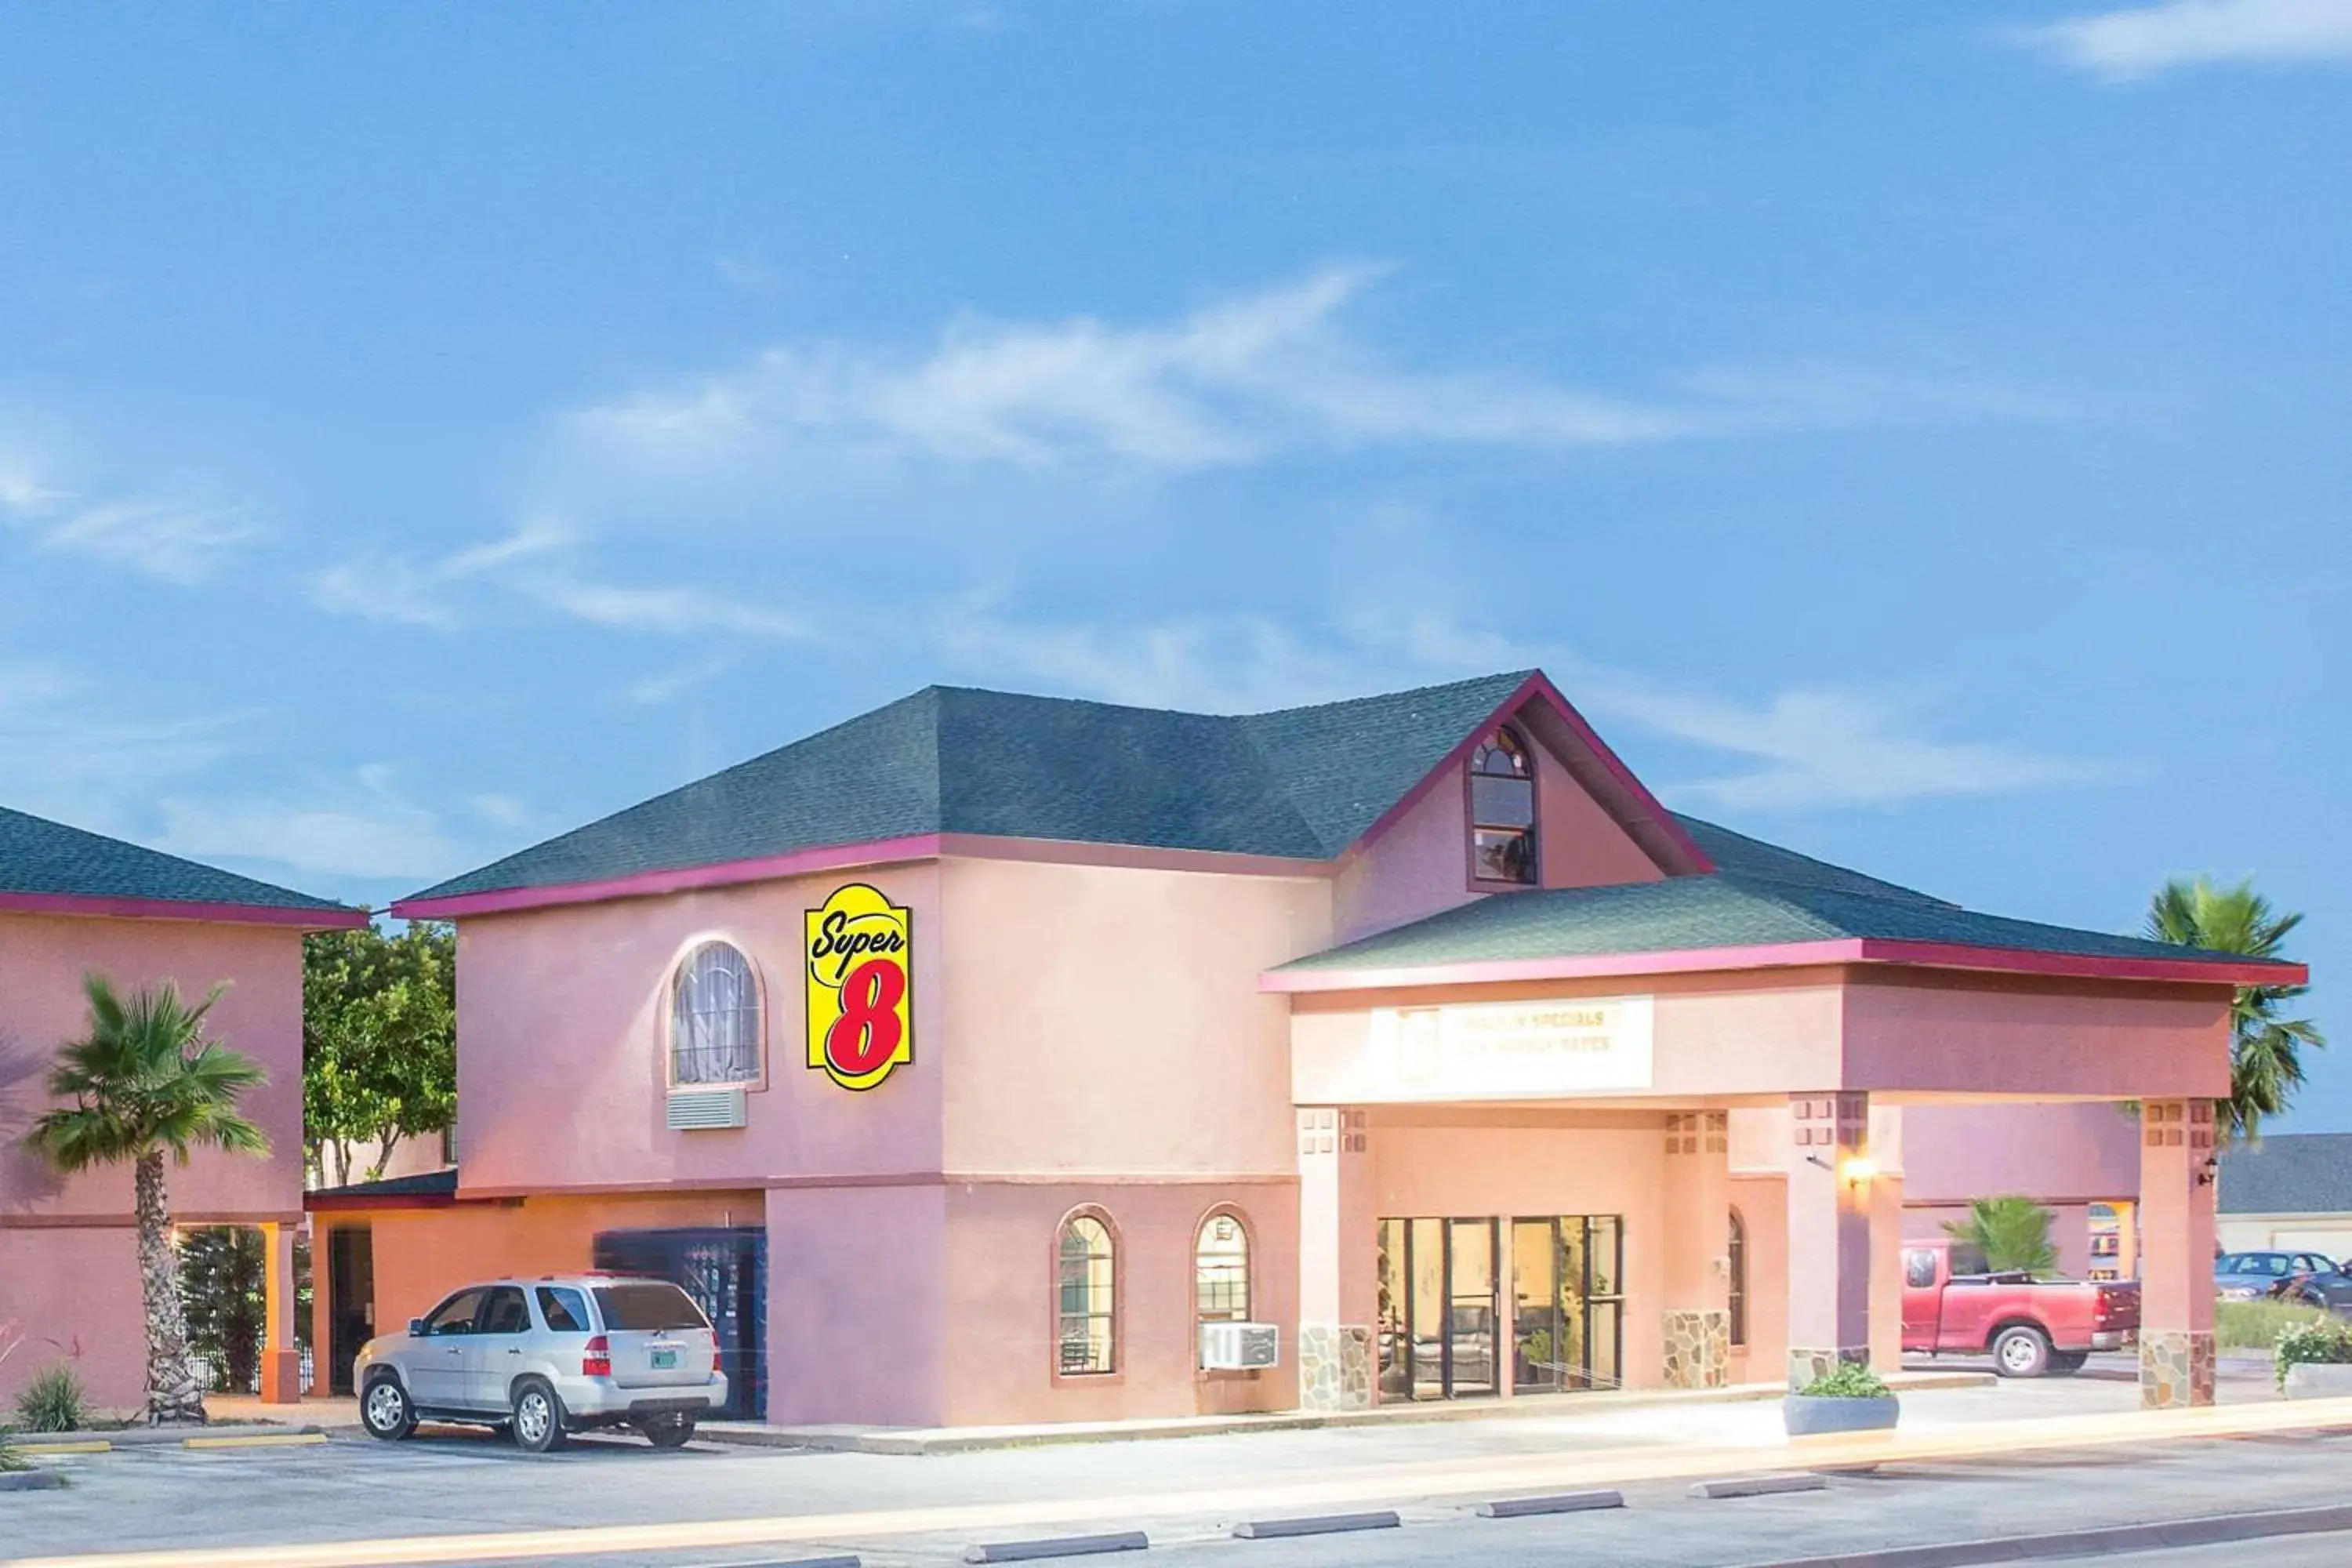 Property Building in Super 8 by Wyndham San Angelo